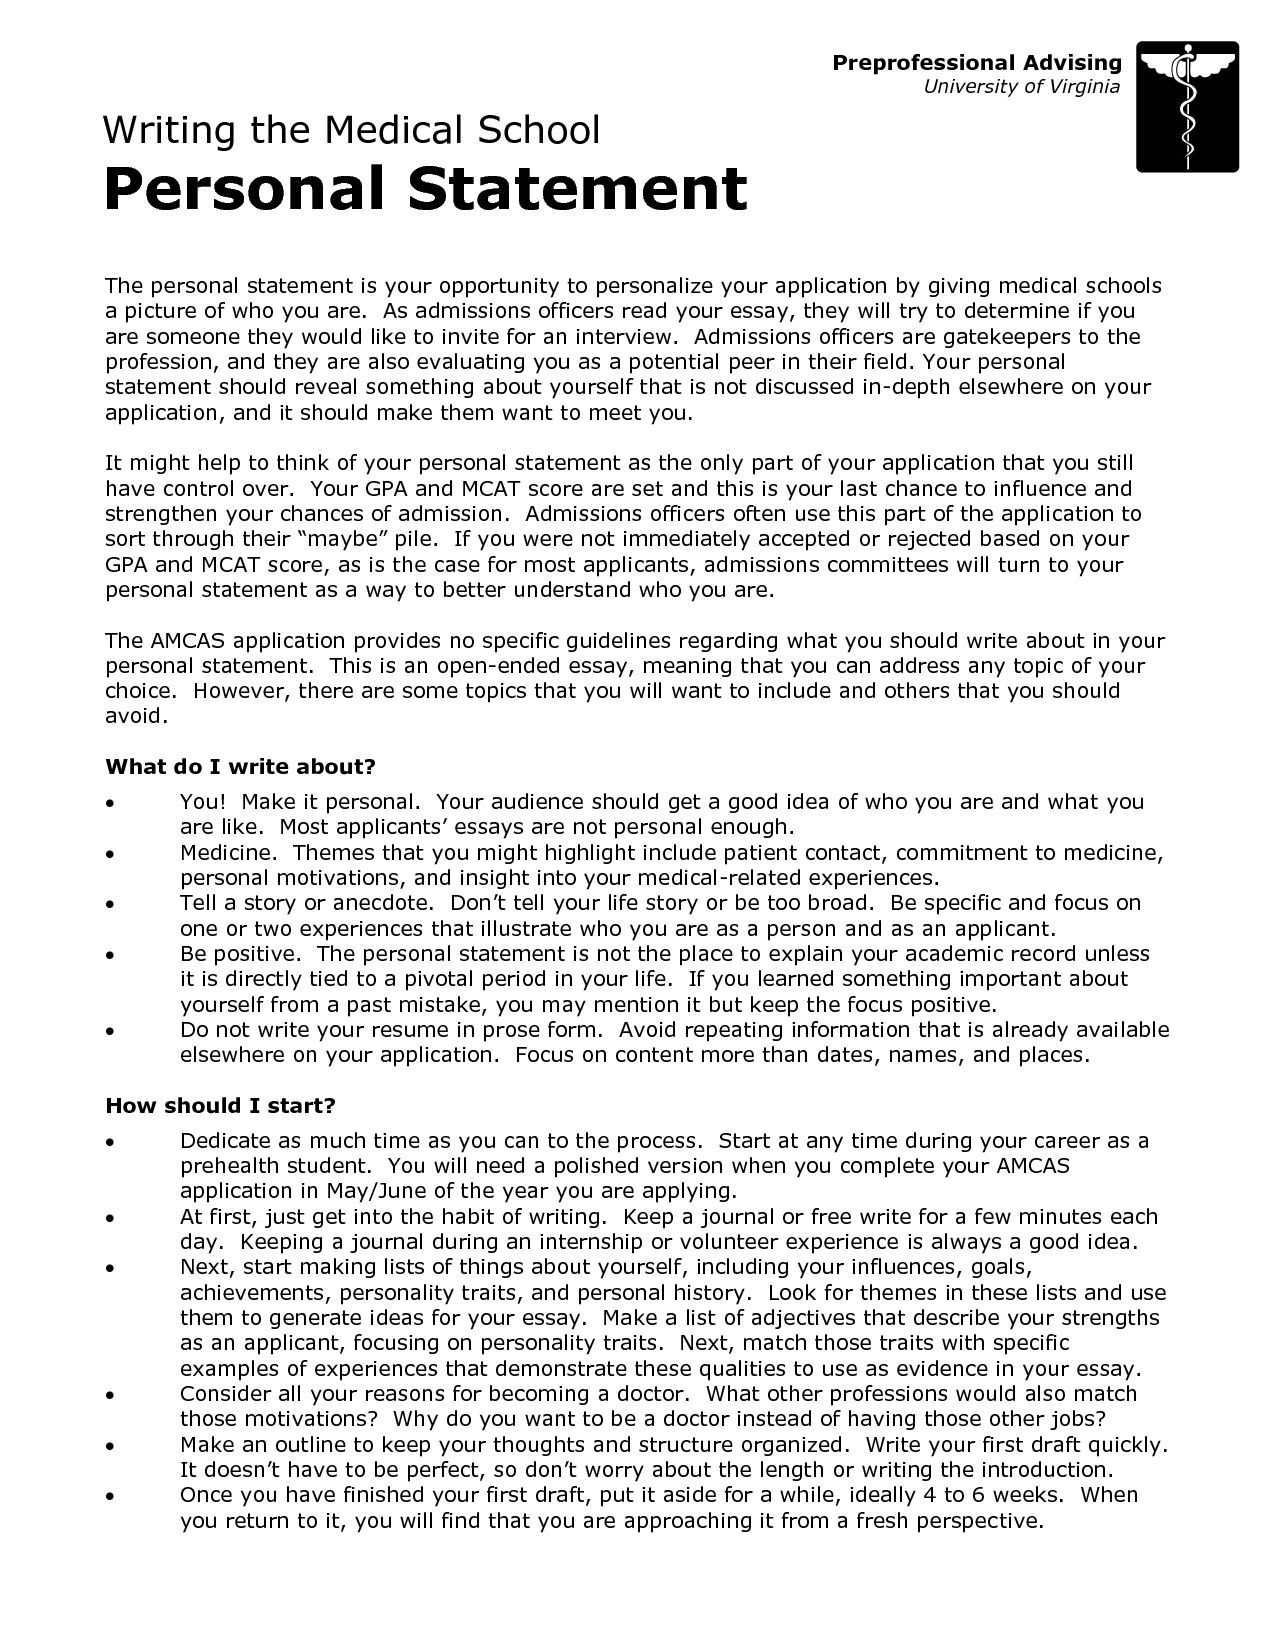 How to write a college admissions personal statement